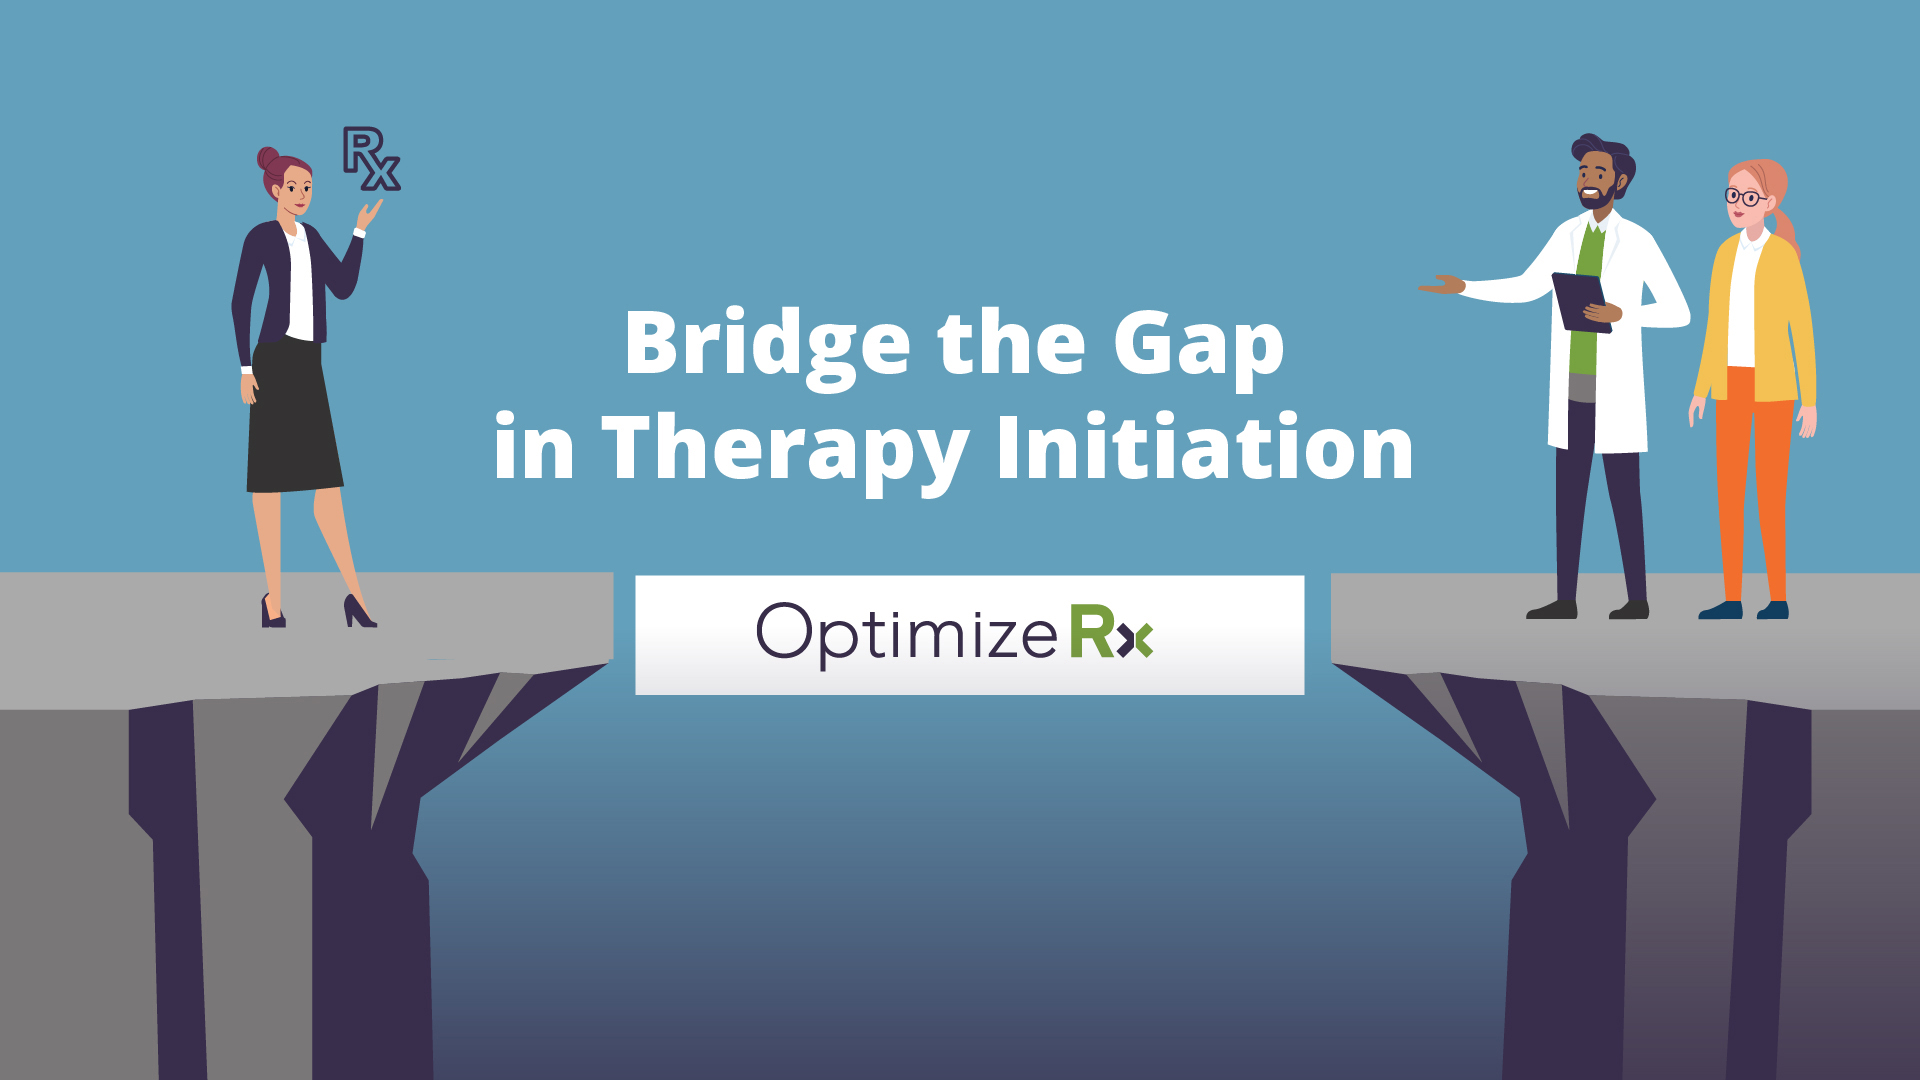 Bridge the gap in therapy initiation